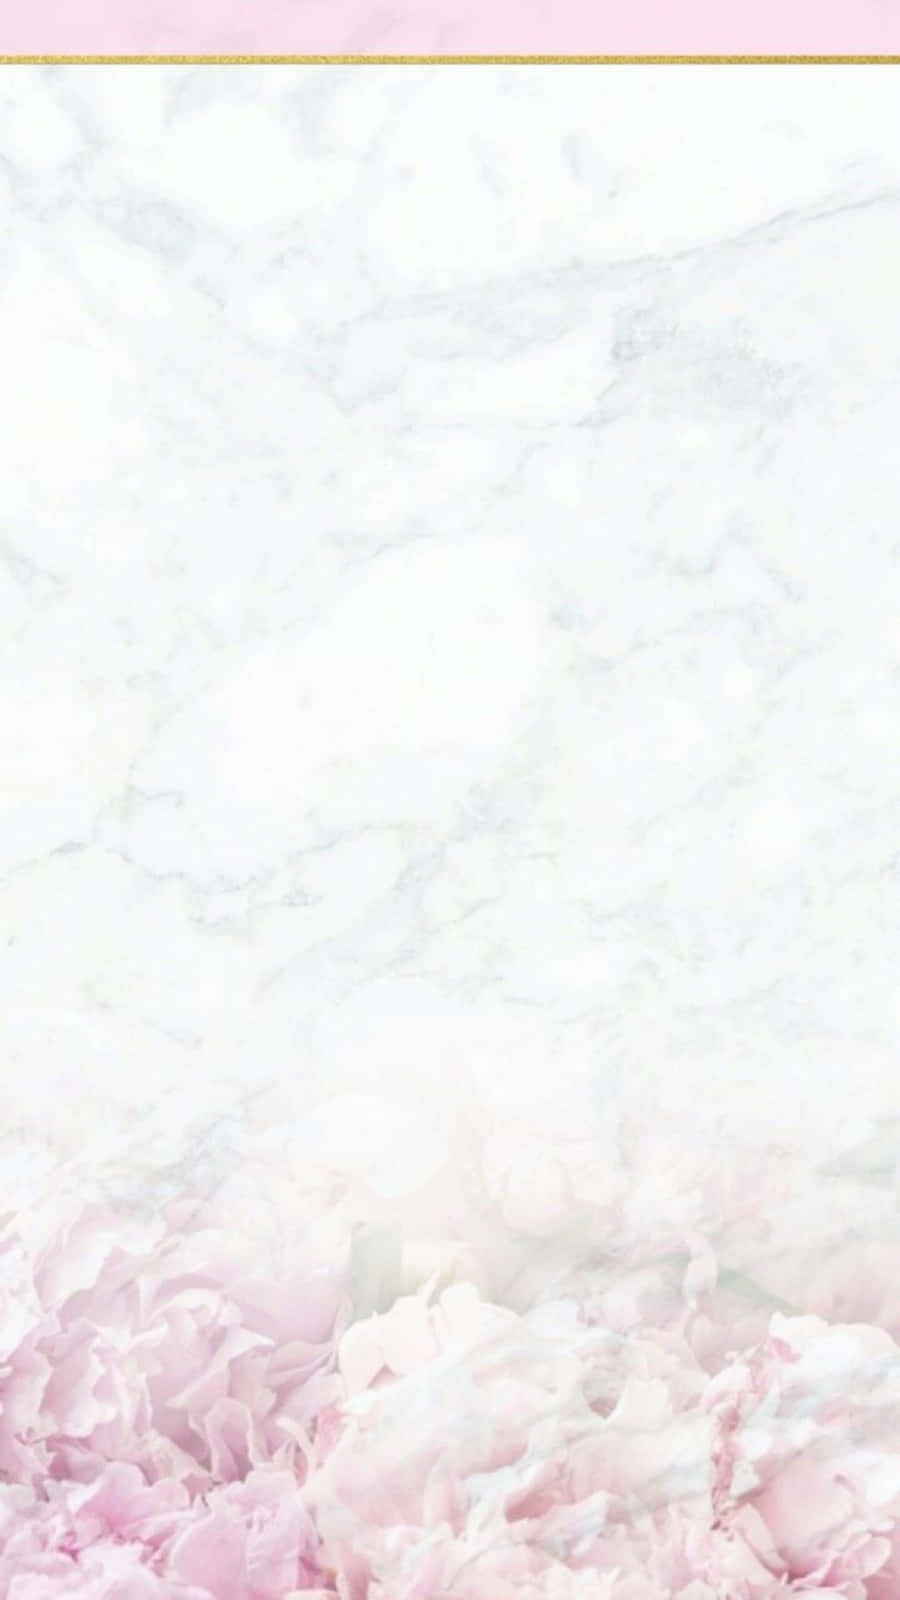 An Aesthetic Picture of Pink and White Wallpaper